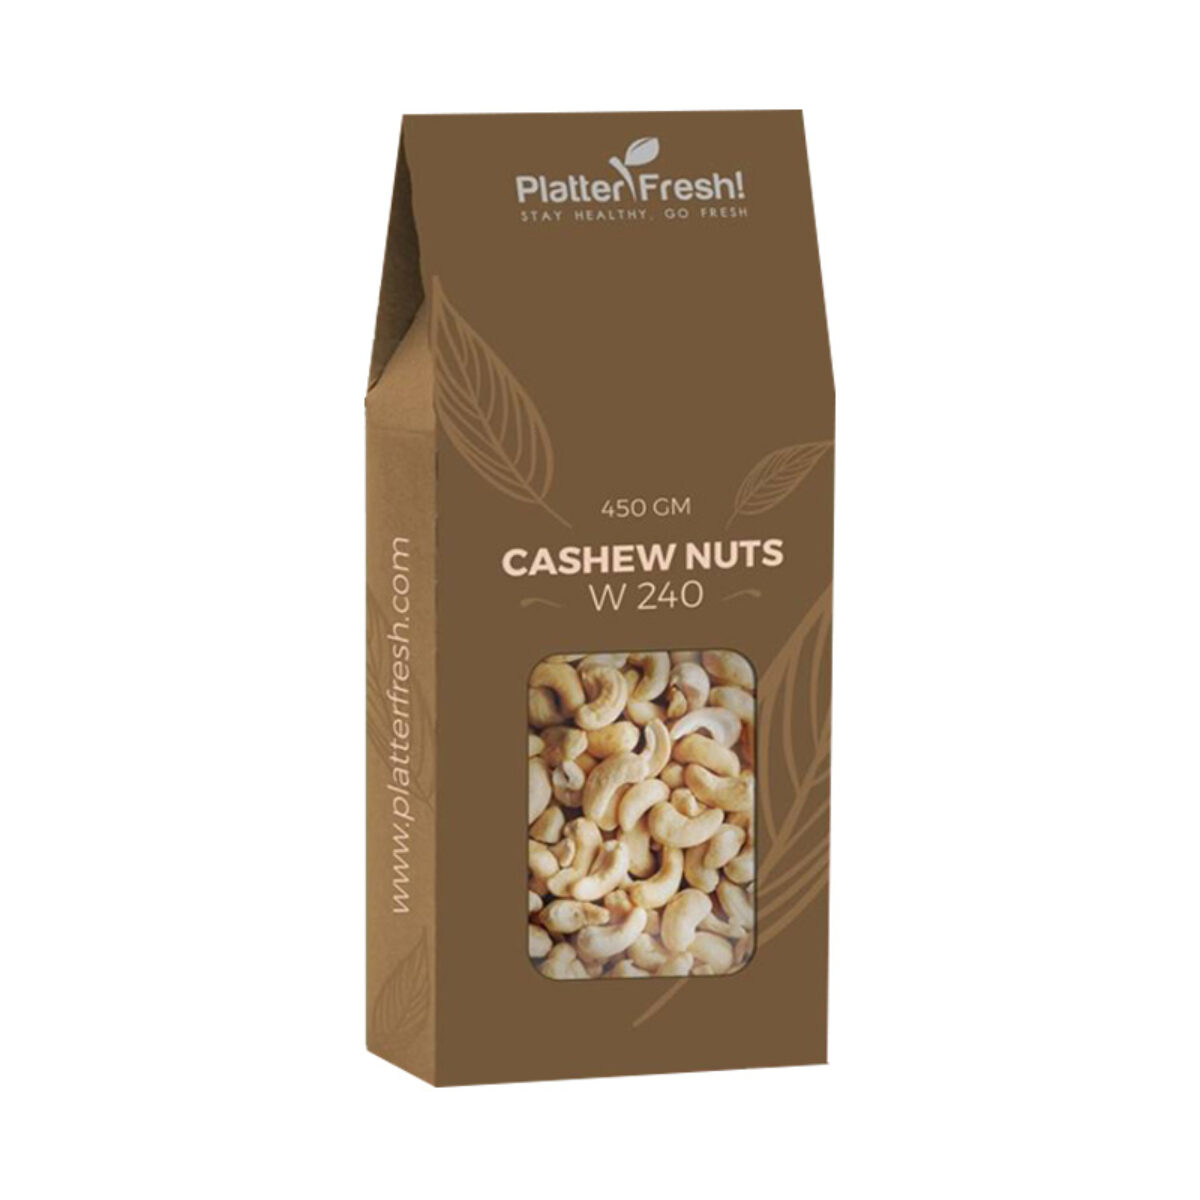 https://ibexpackaging.com/wp-content/uploads/2022/06/Cashew-Nuts-Packaging-Boxes-2-1200x1200.jpg